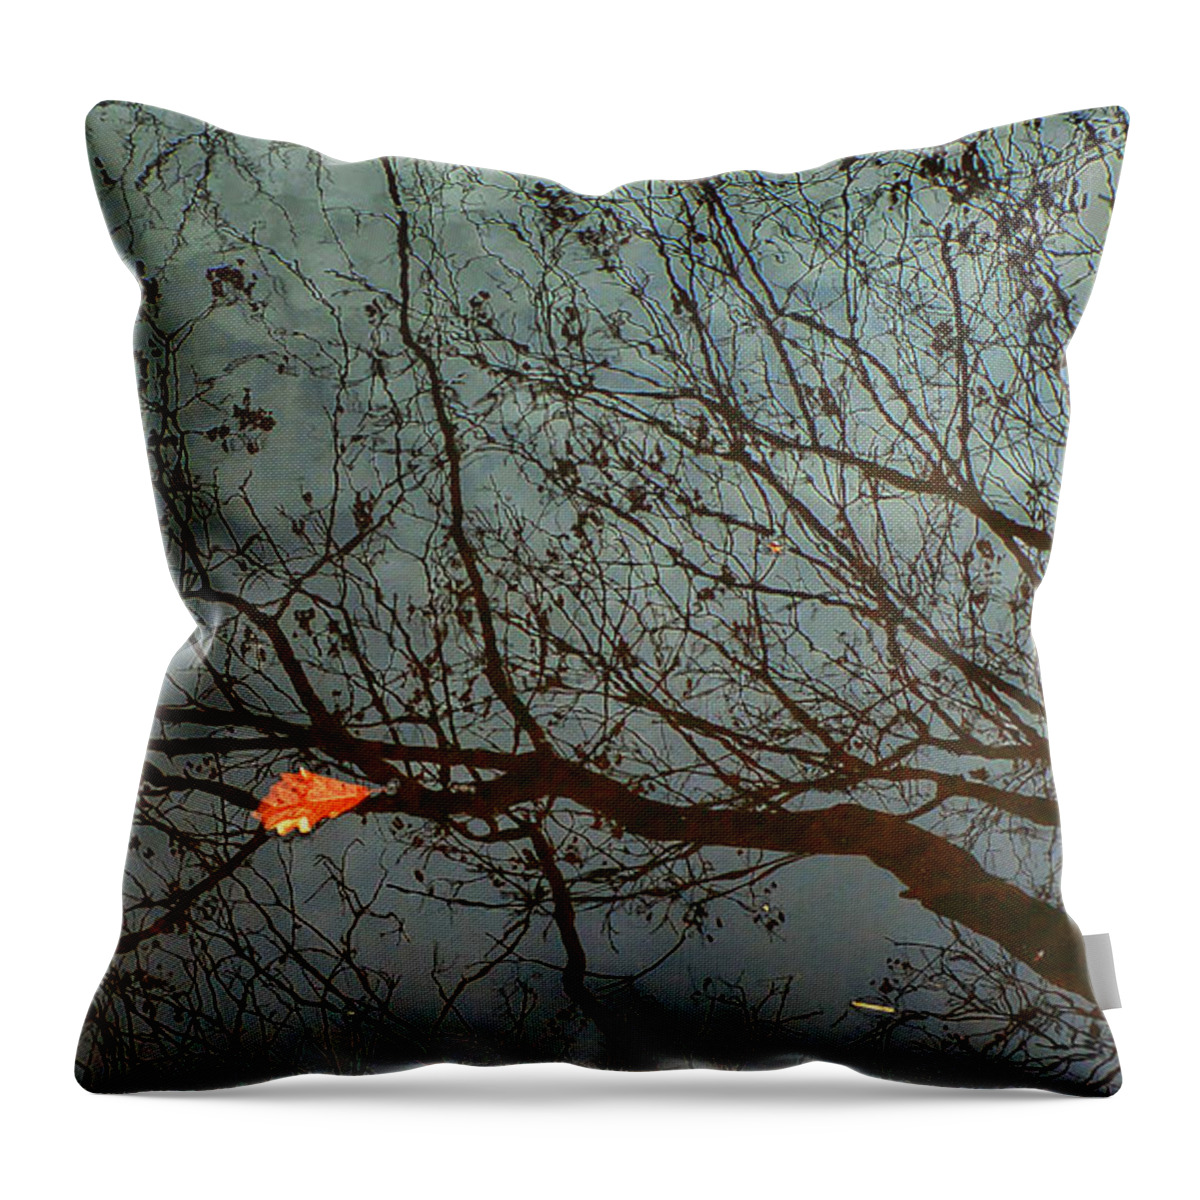 Reflections Throw Pillow featuring the photograph Reflections of a Leaf by Kathi Isserman